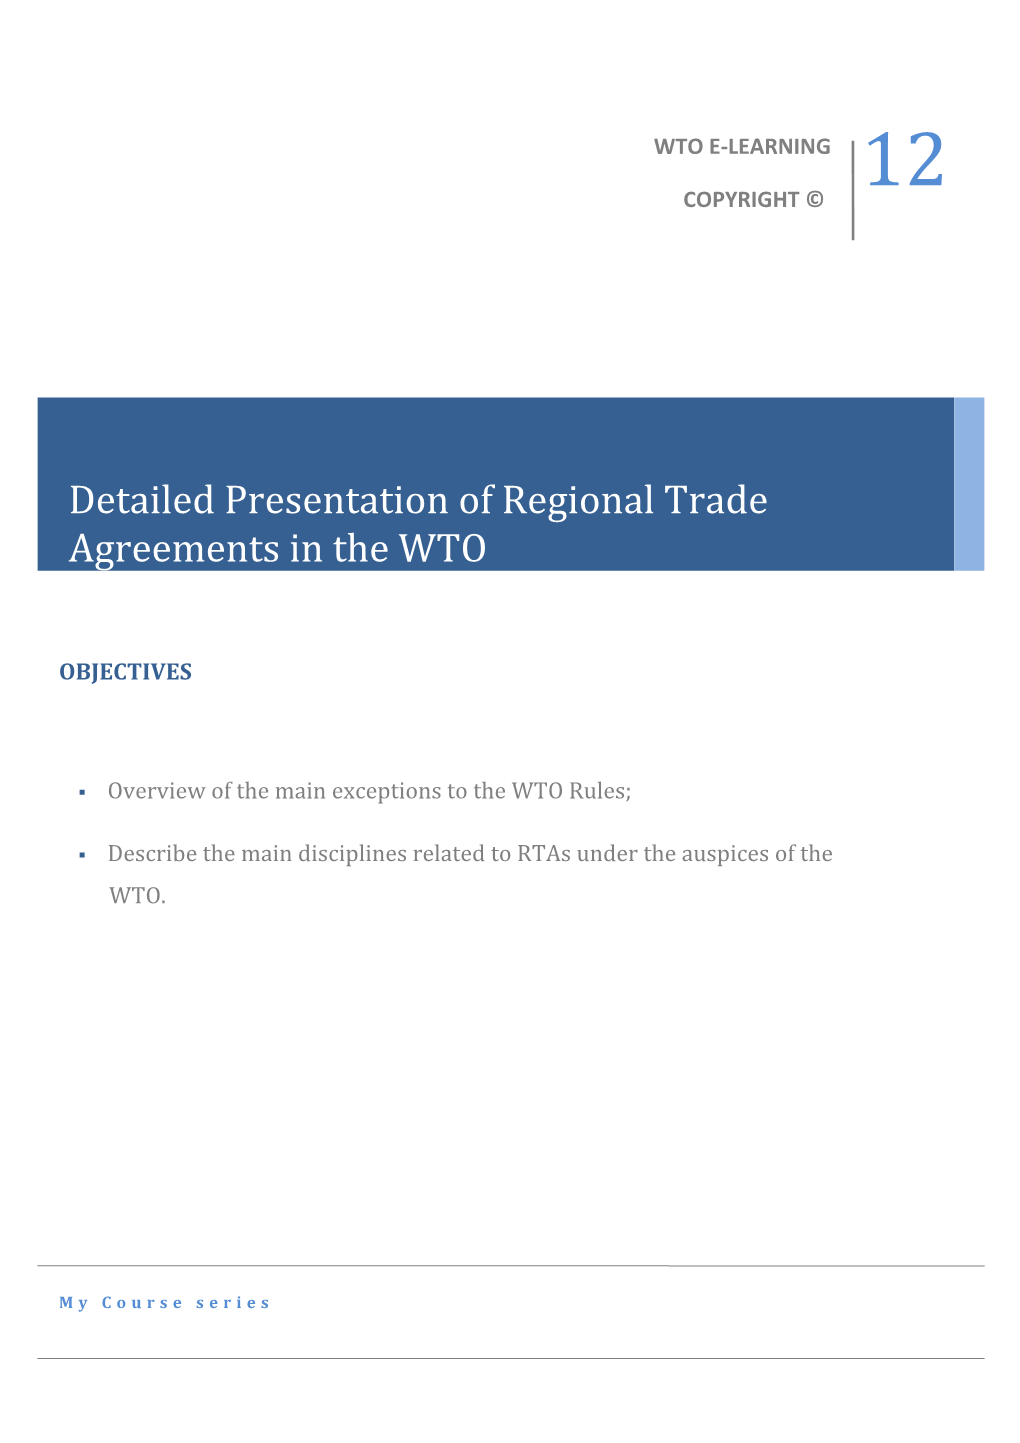 WTO Members Are Subject to Several General Obligations Set out in the Generalagreement